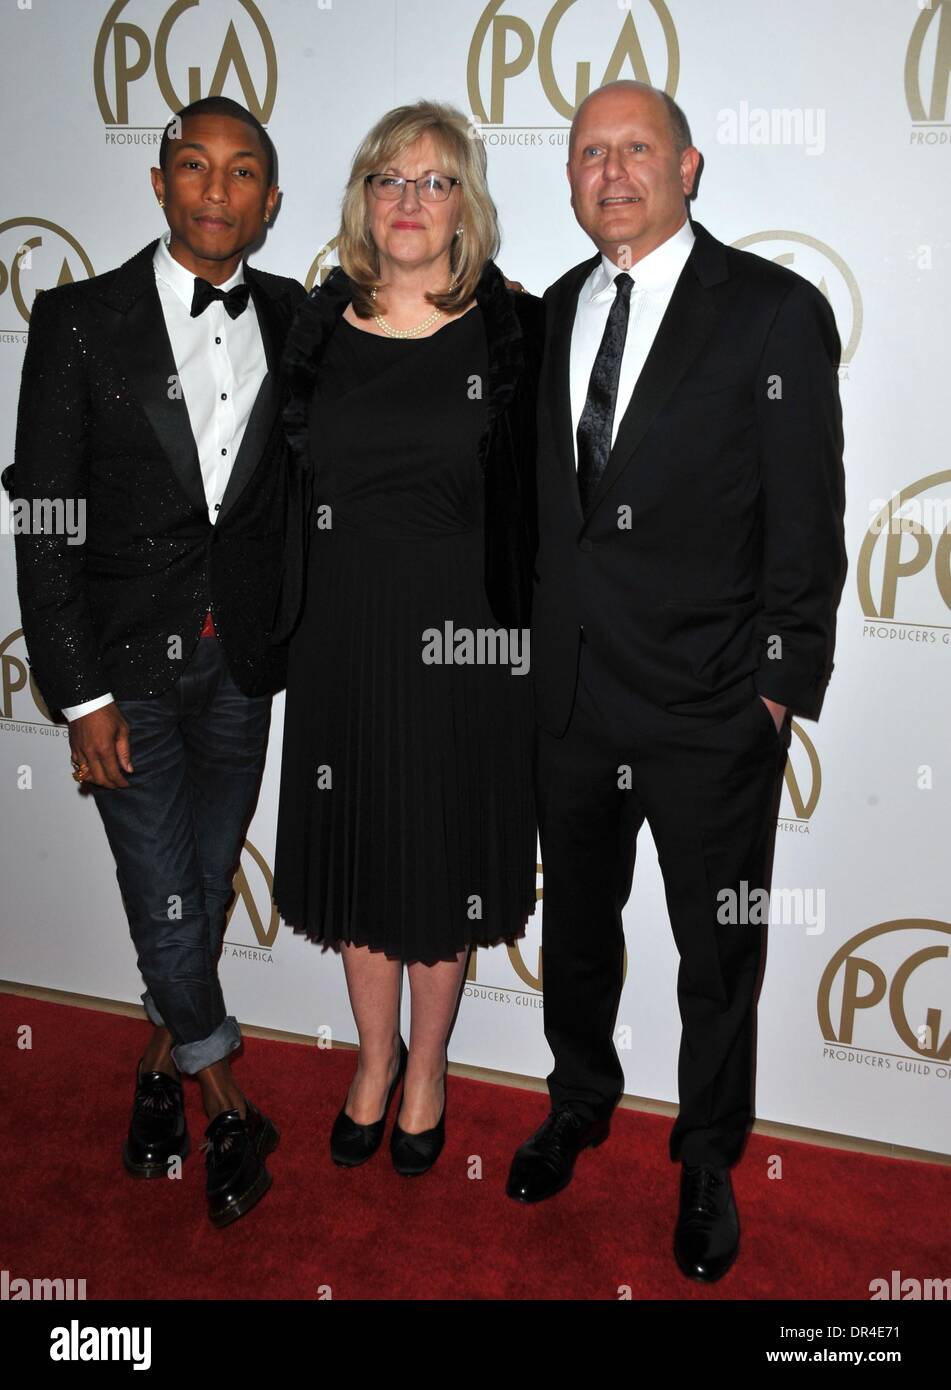 Beverly Hills, CA, . 19th Jan, 2014. Christopher Meledandri, Pharrell Williams, Janet Healy at arrivals for 25th Annual Producers Guild of America Awards (PGAs) - Arrivals, The Beverly Hilton Hotel, Beverly Hills, CA January 19, 2014. Credit:  Dee Cercone/Everett Collection/Alamy Live News Stock Photo